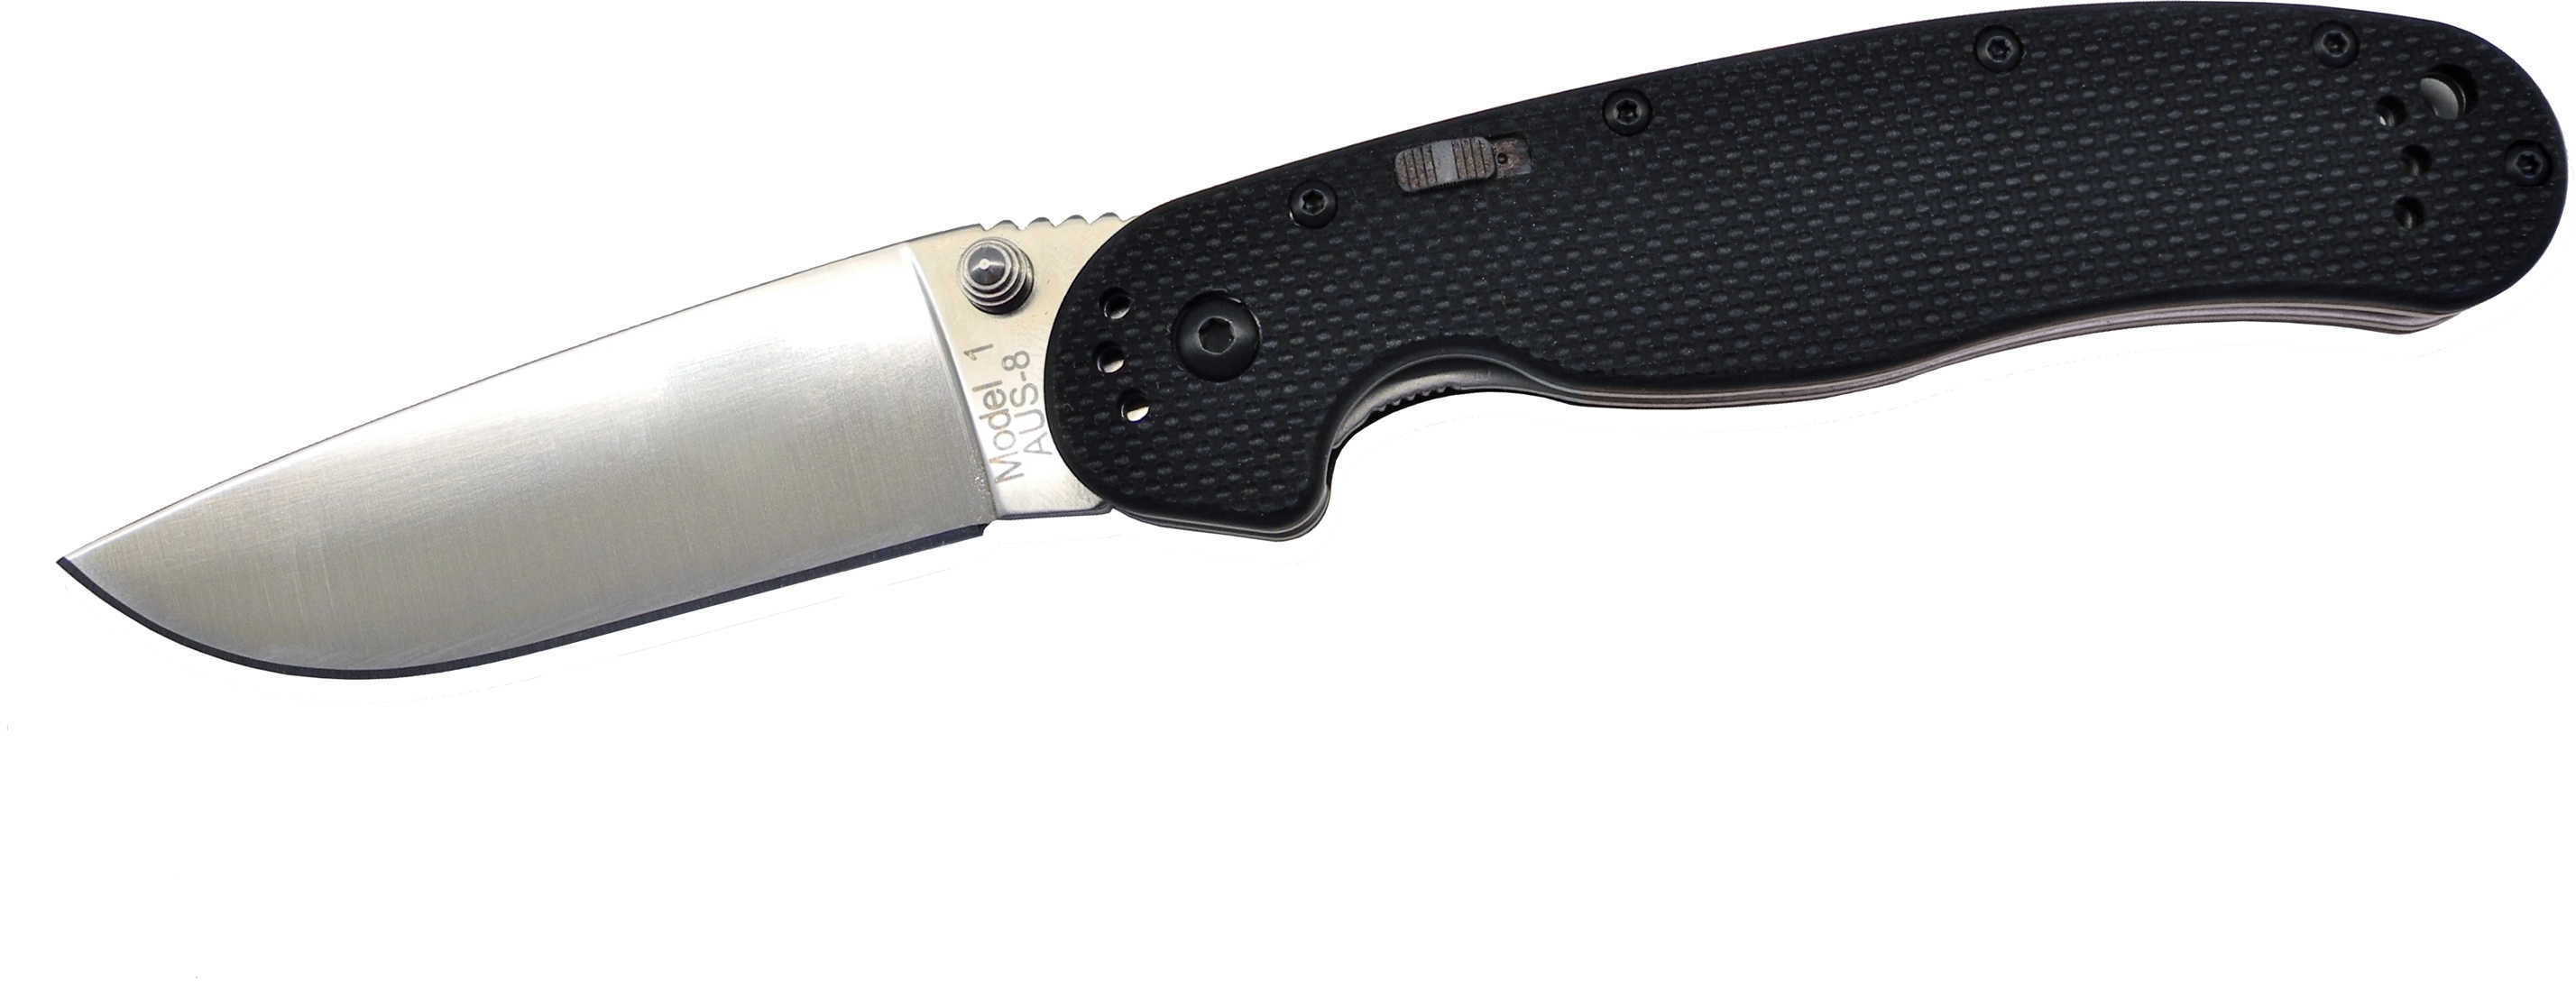 Ontario Knife Company RAT1A Assisted Opener SP Md: 8870